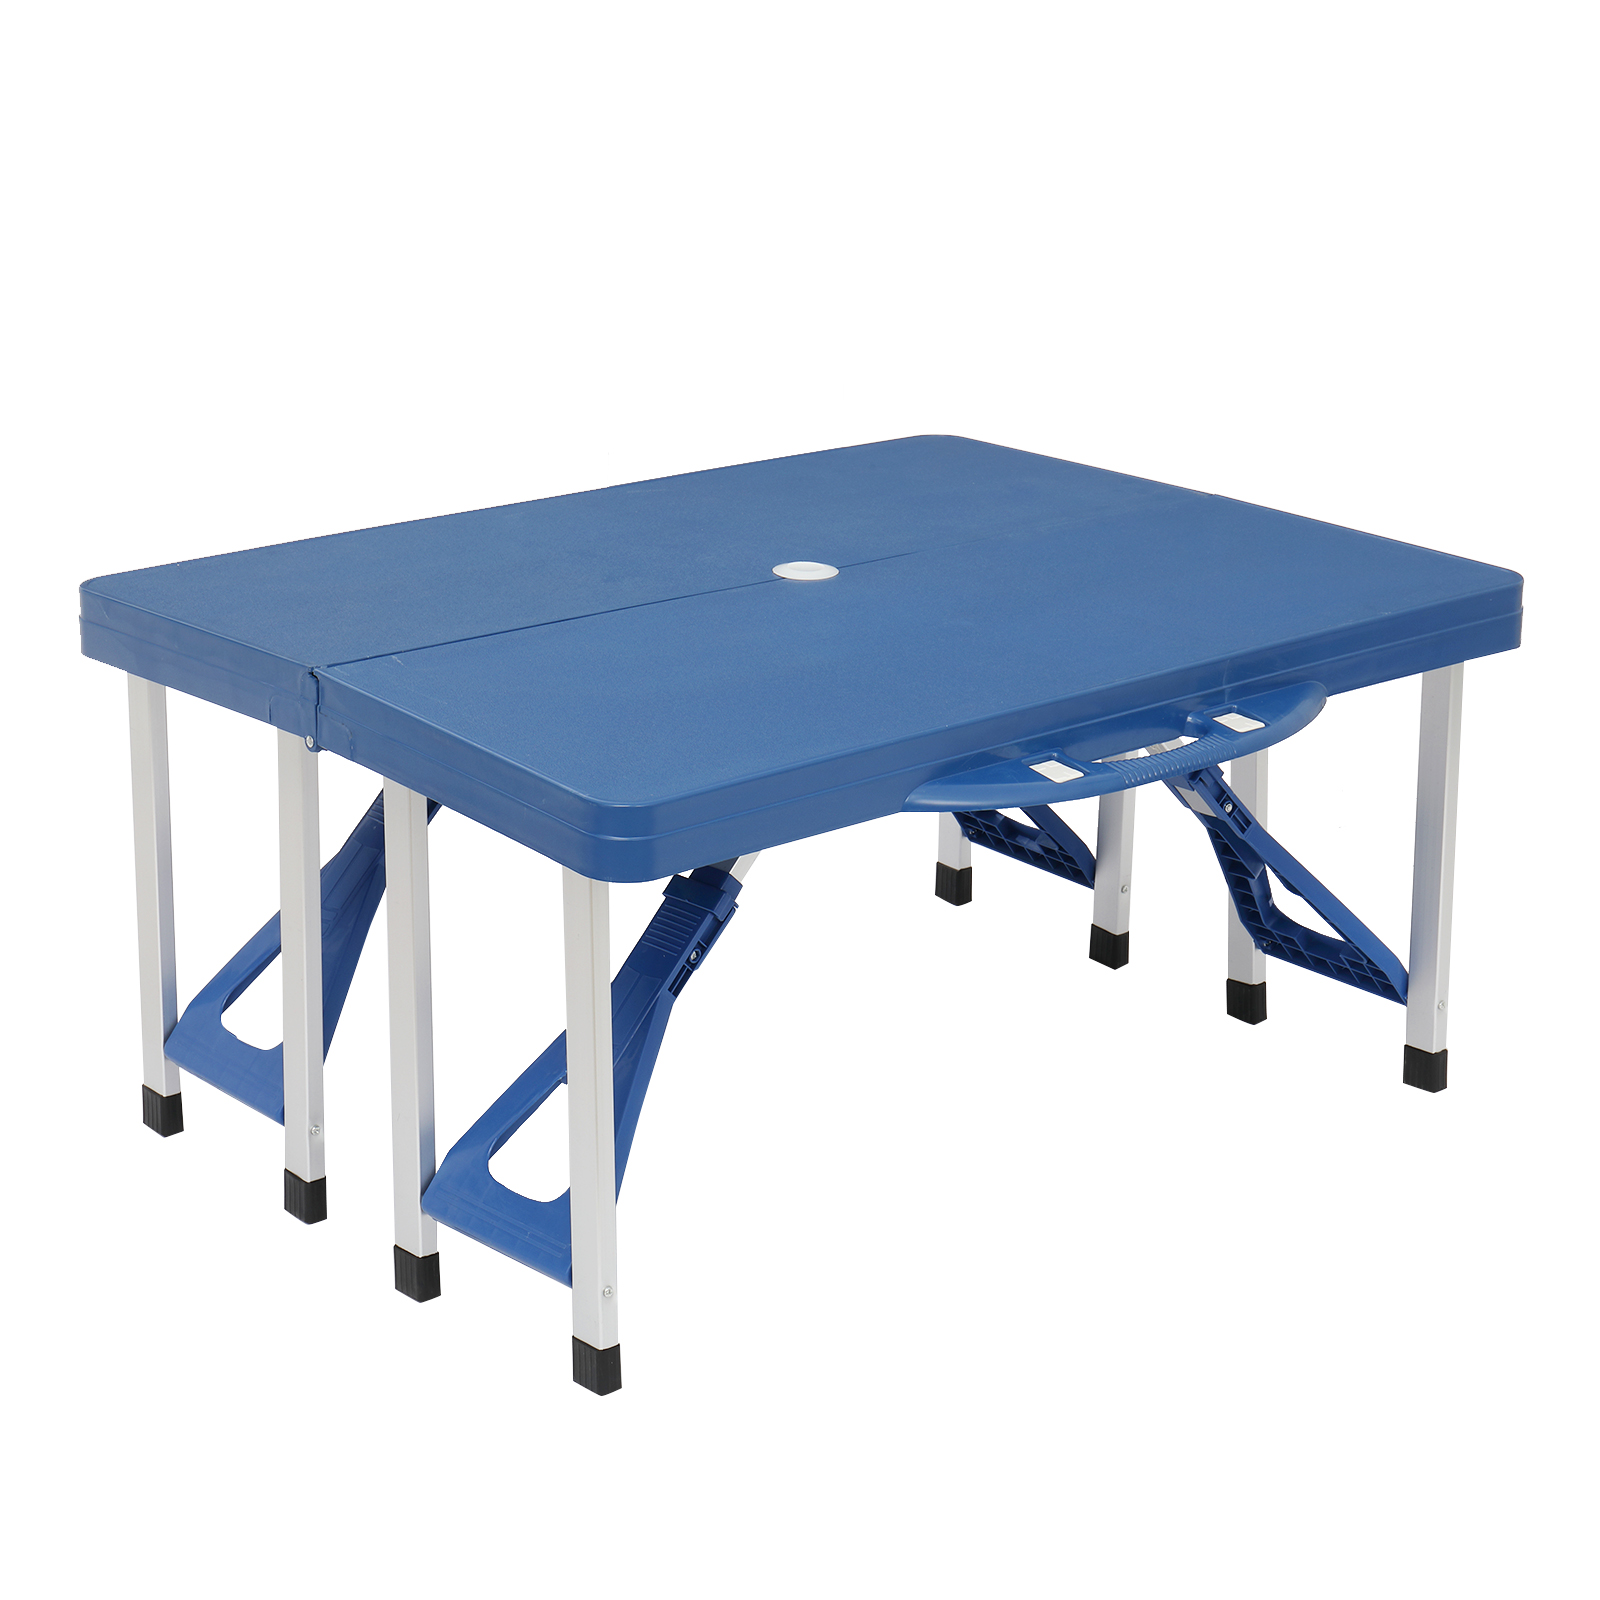 One Piece Folding Table Picnic Table Folding Camping Table Portable Picnic Table Camping Table,Lightweight Compact Aluminum Picnic Table with 4 Seats Chairs and Umbrella Hole for Outdoor Indoor,Blue - image 5 of 9